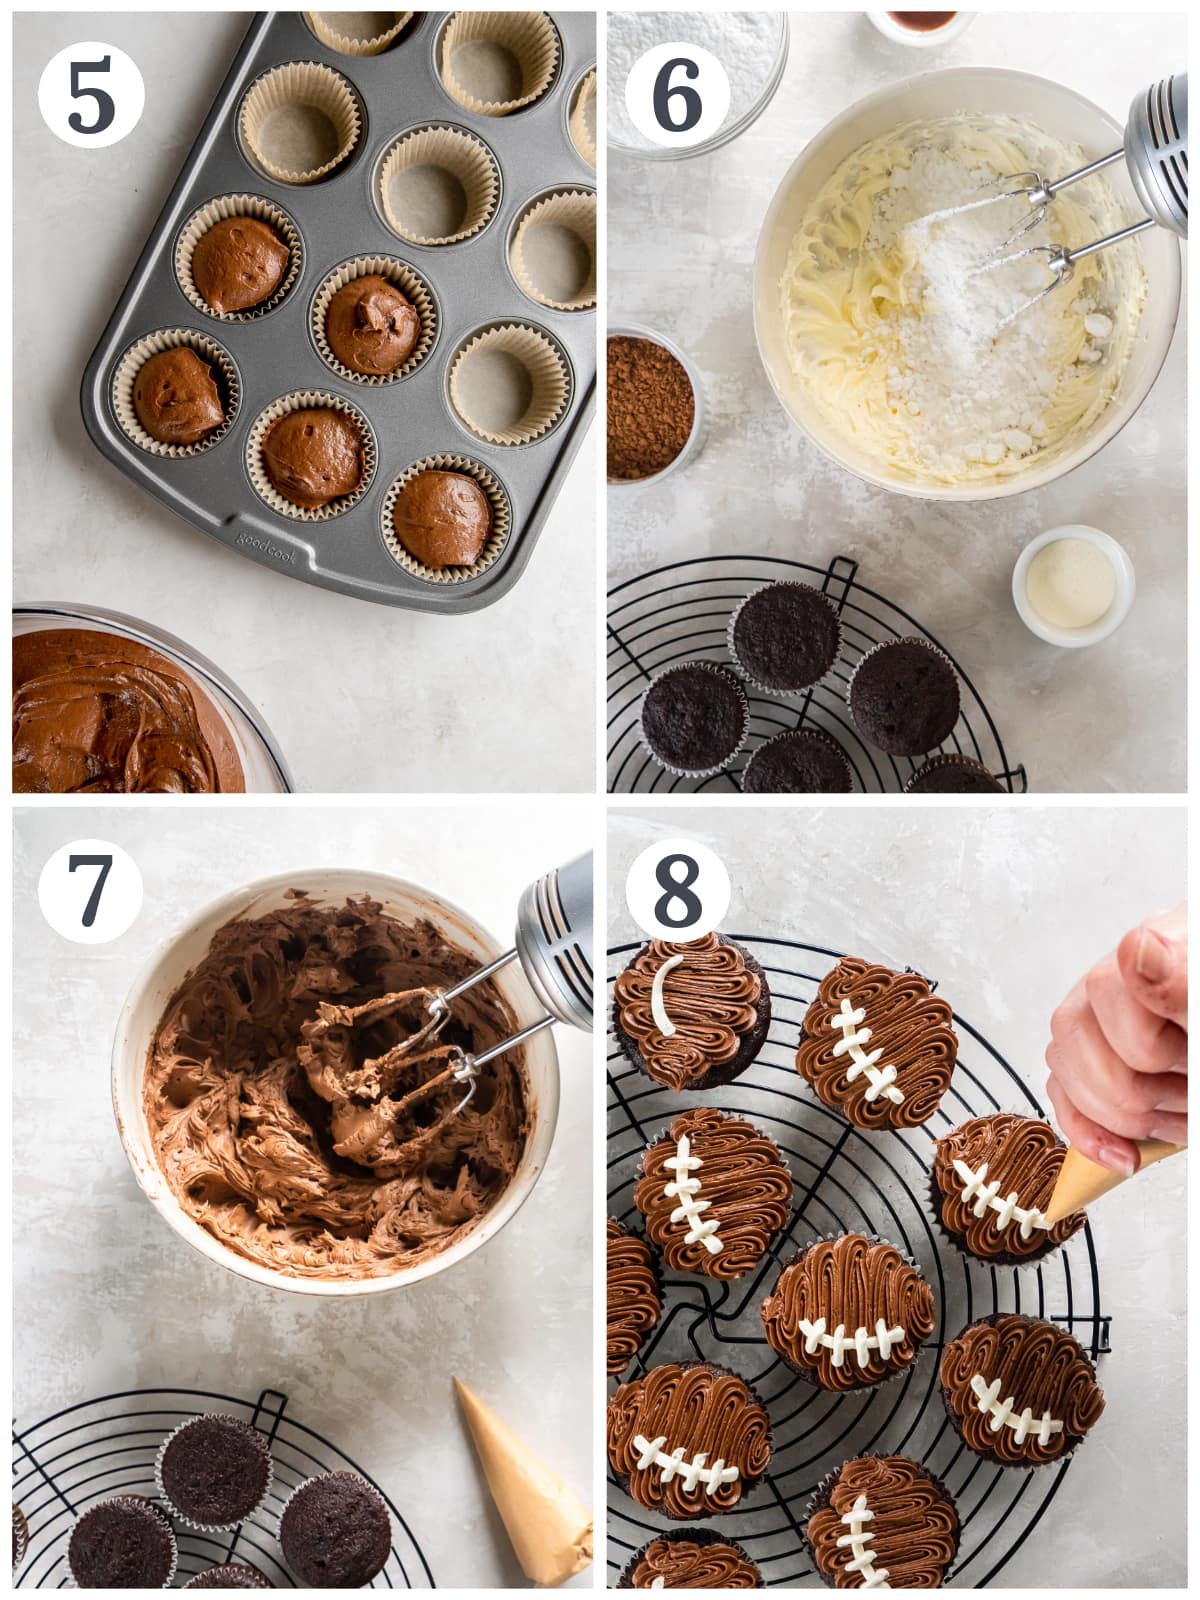 photo collage demonstrating how to make chocolate frosting and decorate football cupcakes.